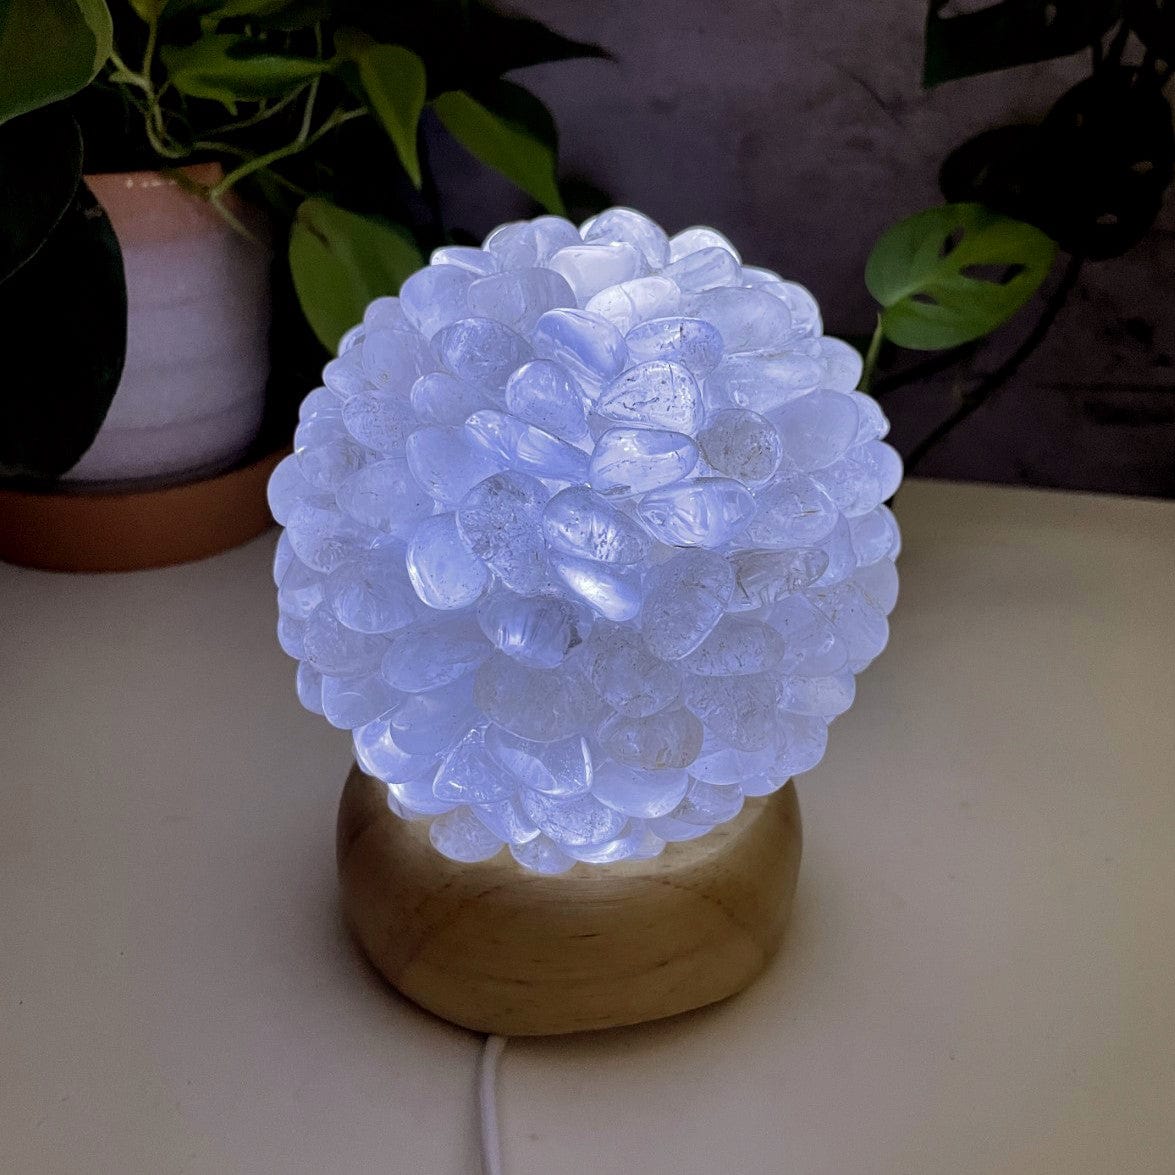 Crystal Quartz tumbled stone lamp, lit with the inserted light